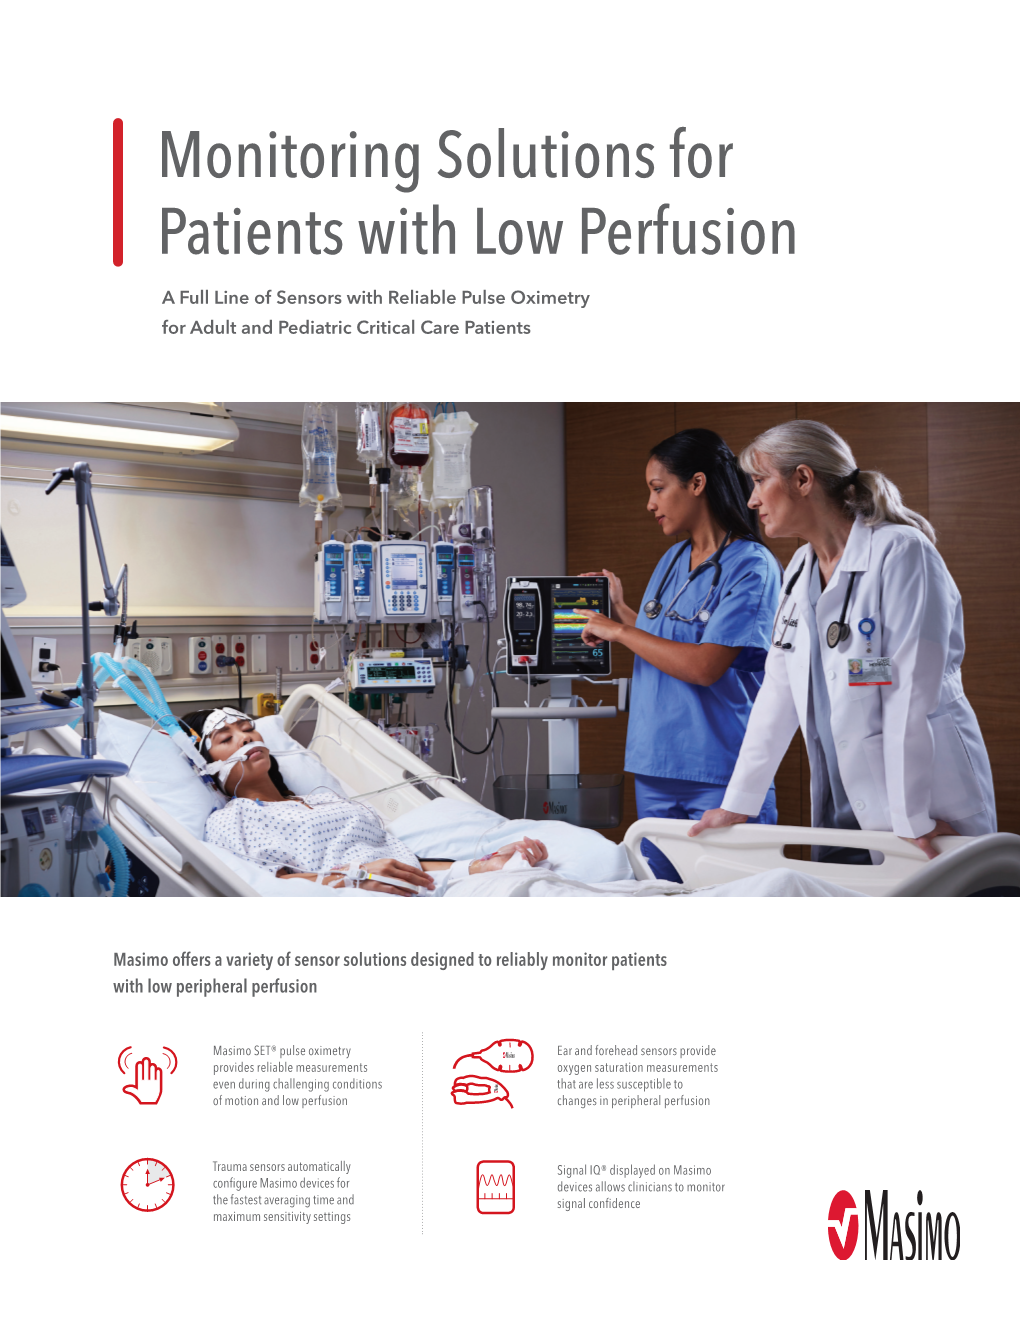 Monitoring Solutions for Patients with Low Perfusion